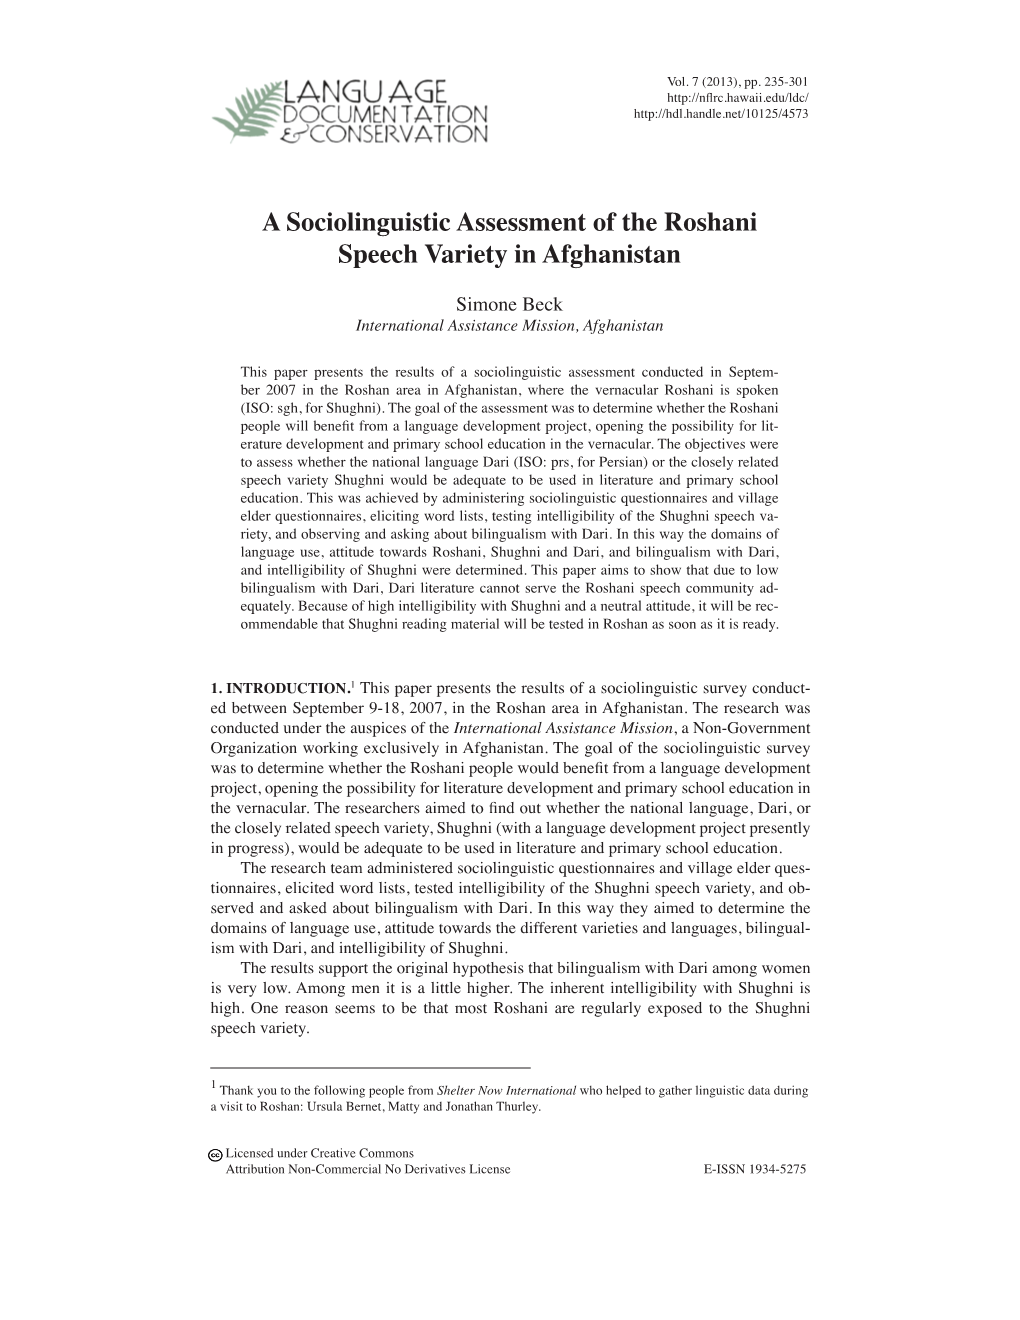 A Sociolinguistic Assessment of the Roshani Speech Variety in Afghanistan